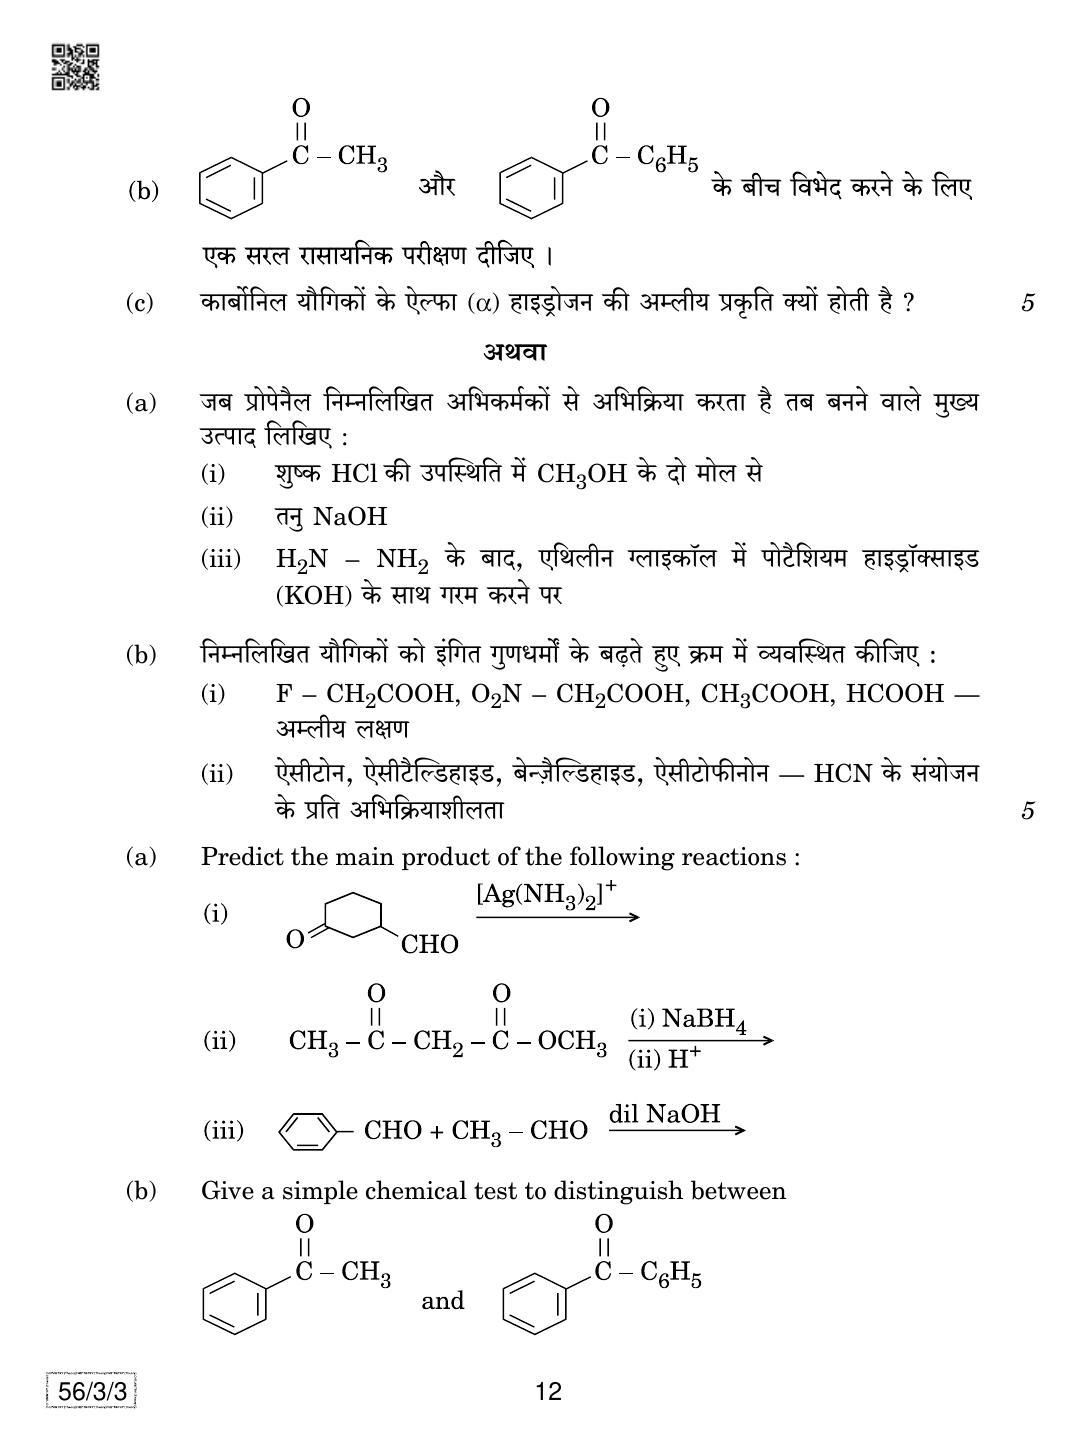 CBSE Class 12 56-3-3 Chemistry 2019 Question Paper - Page 12